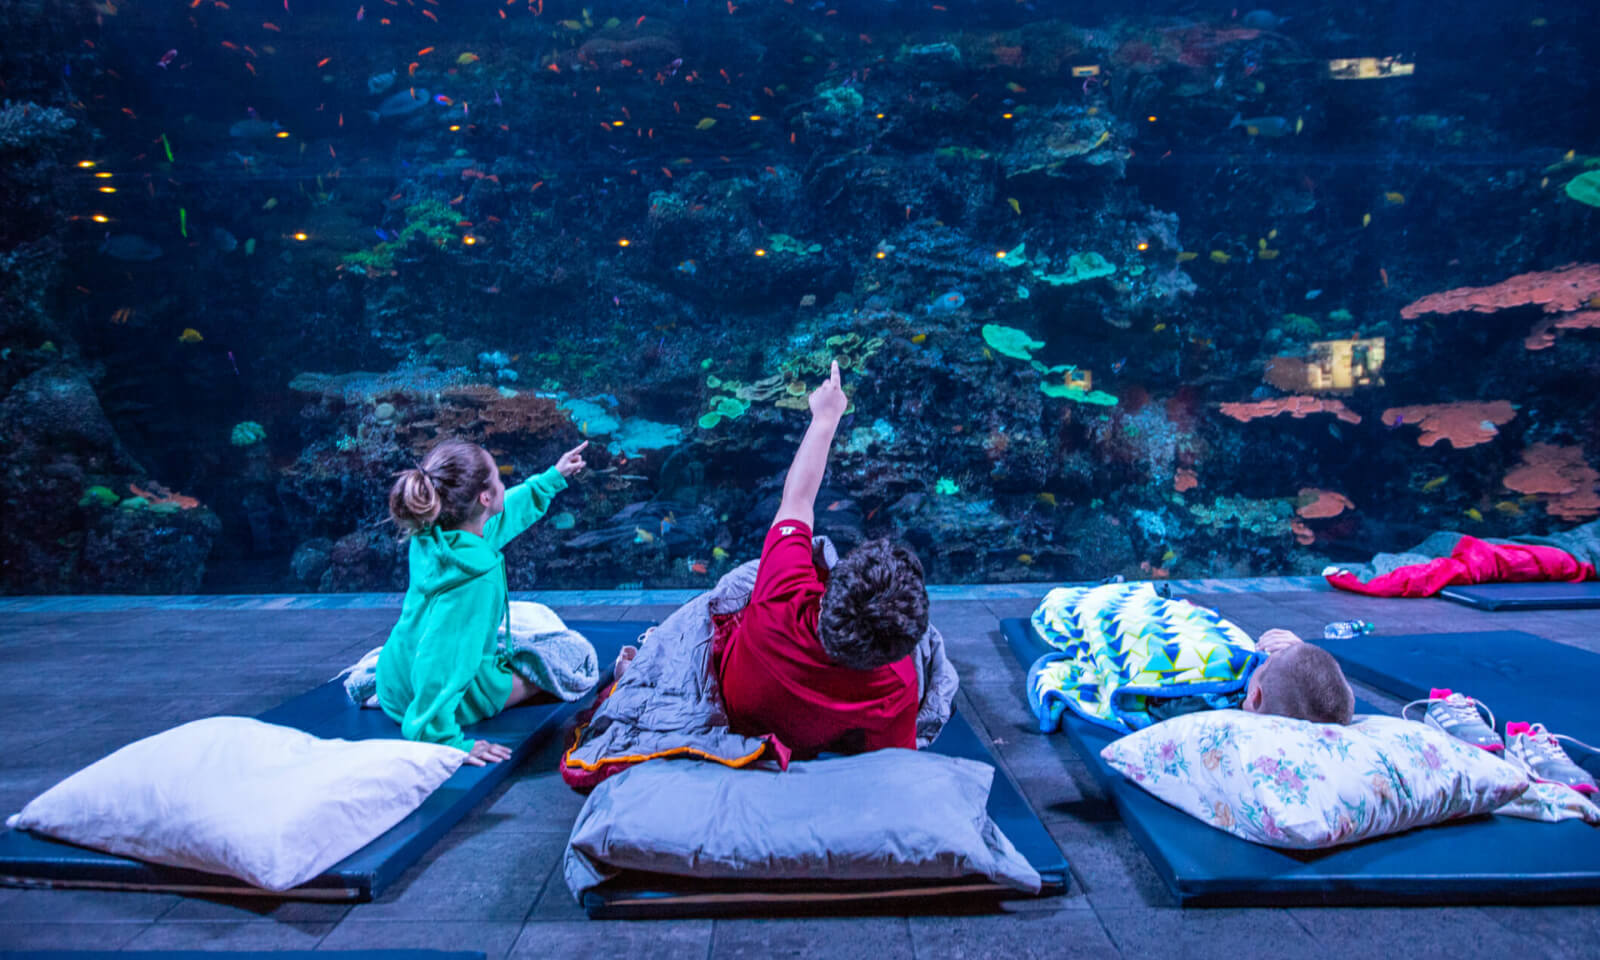 Create a core memory with a stay at the largest aquarium in the U.S.